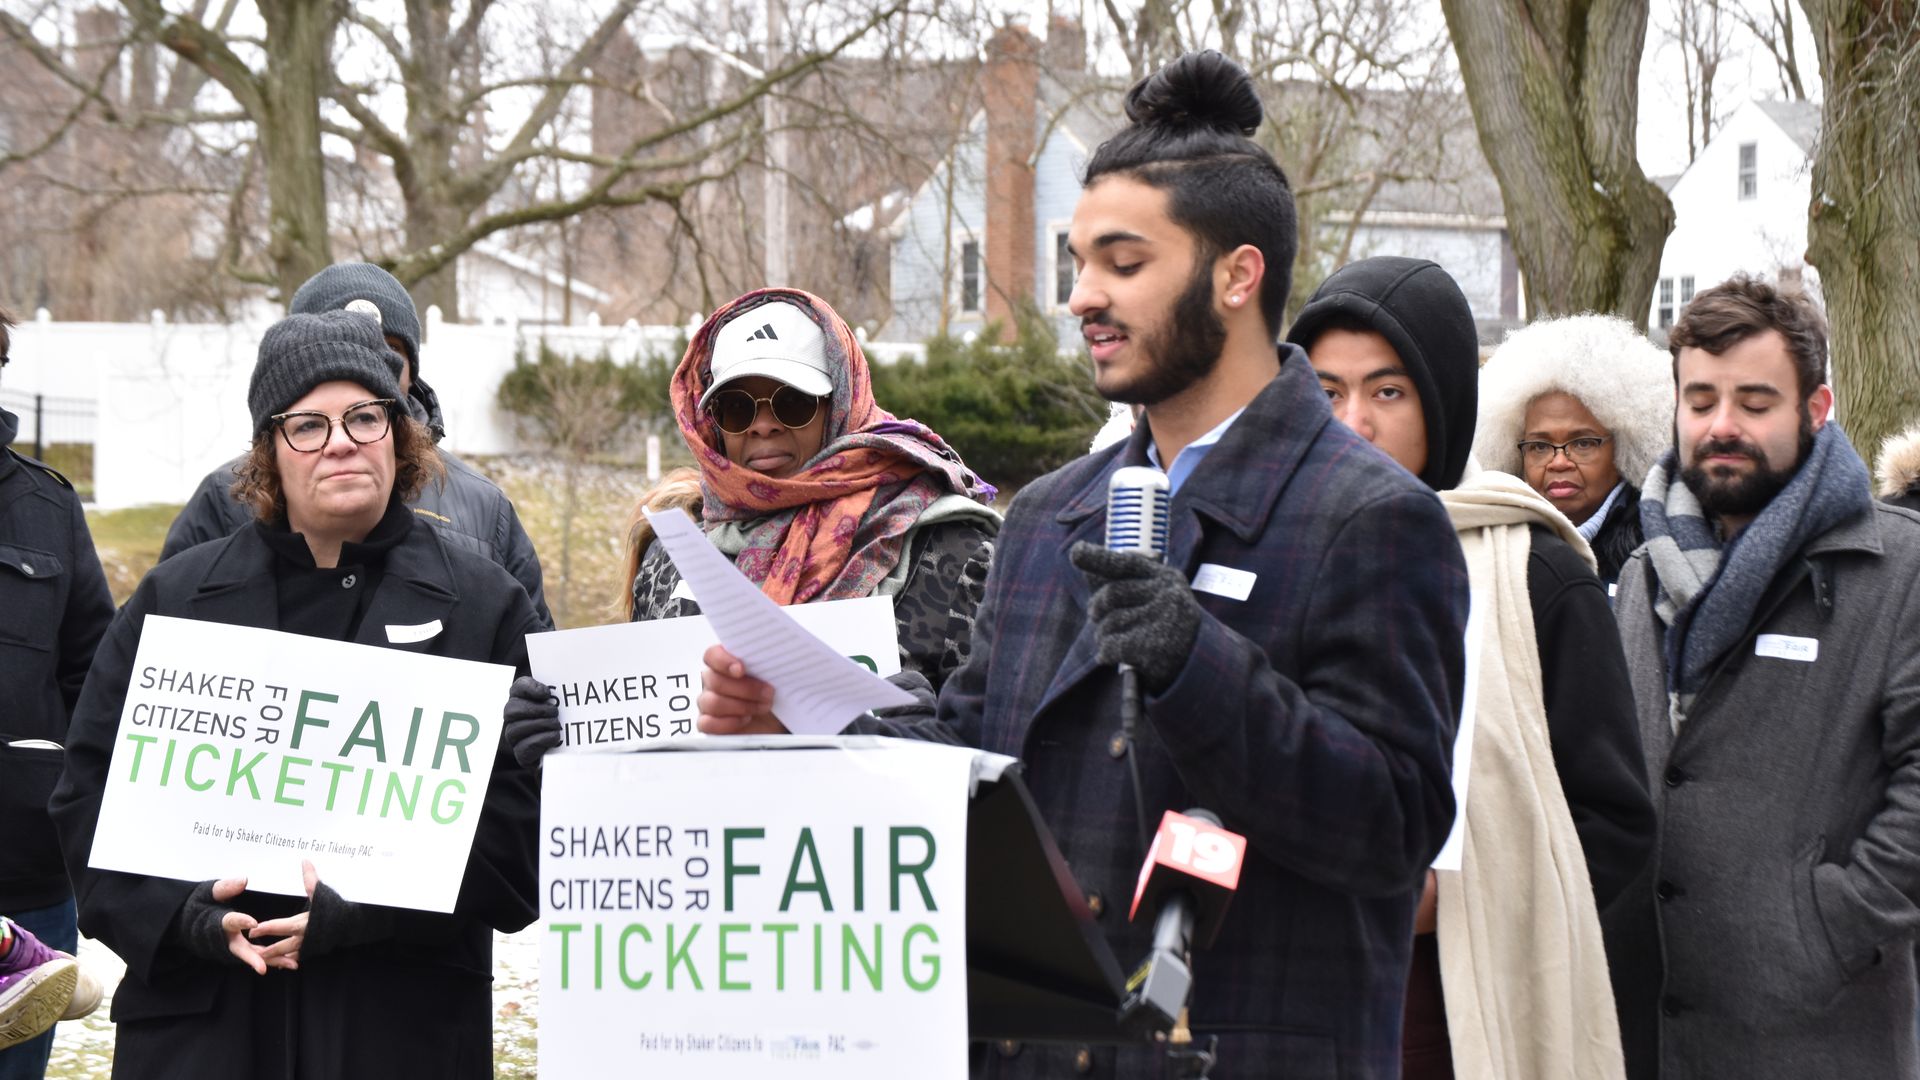 17-year-old Ethan Khorana reads from a paper at outdoor event launching Shaker Citizens for Fair Ticketing event. People in jackets stands behind.